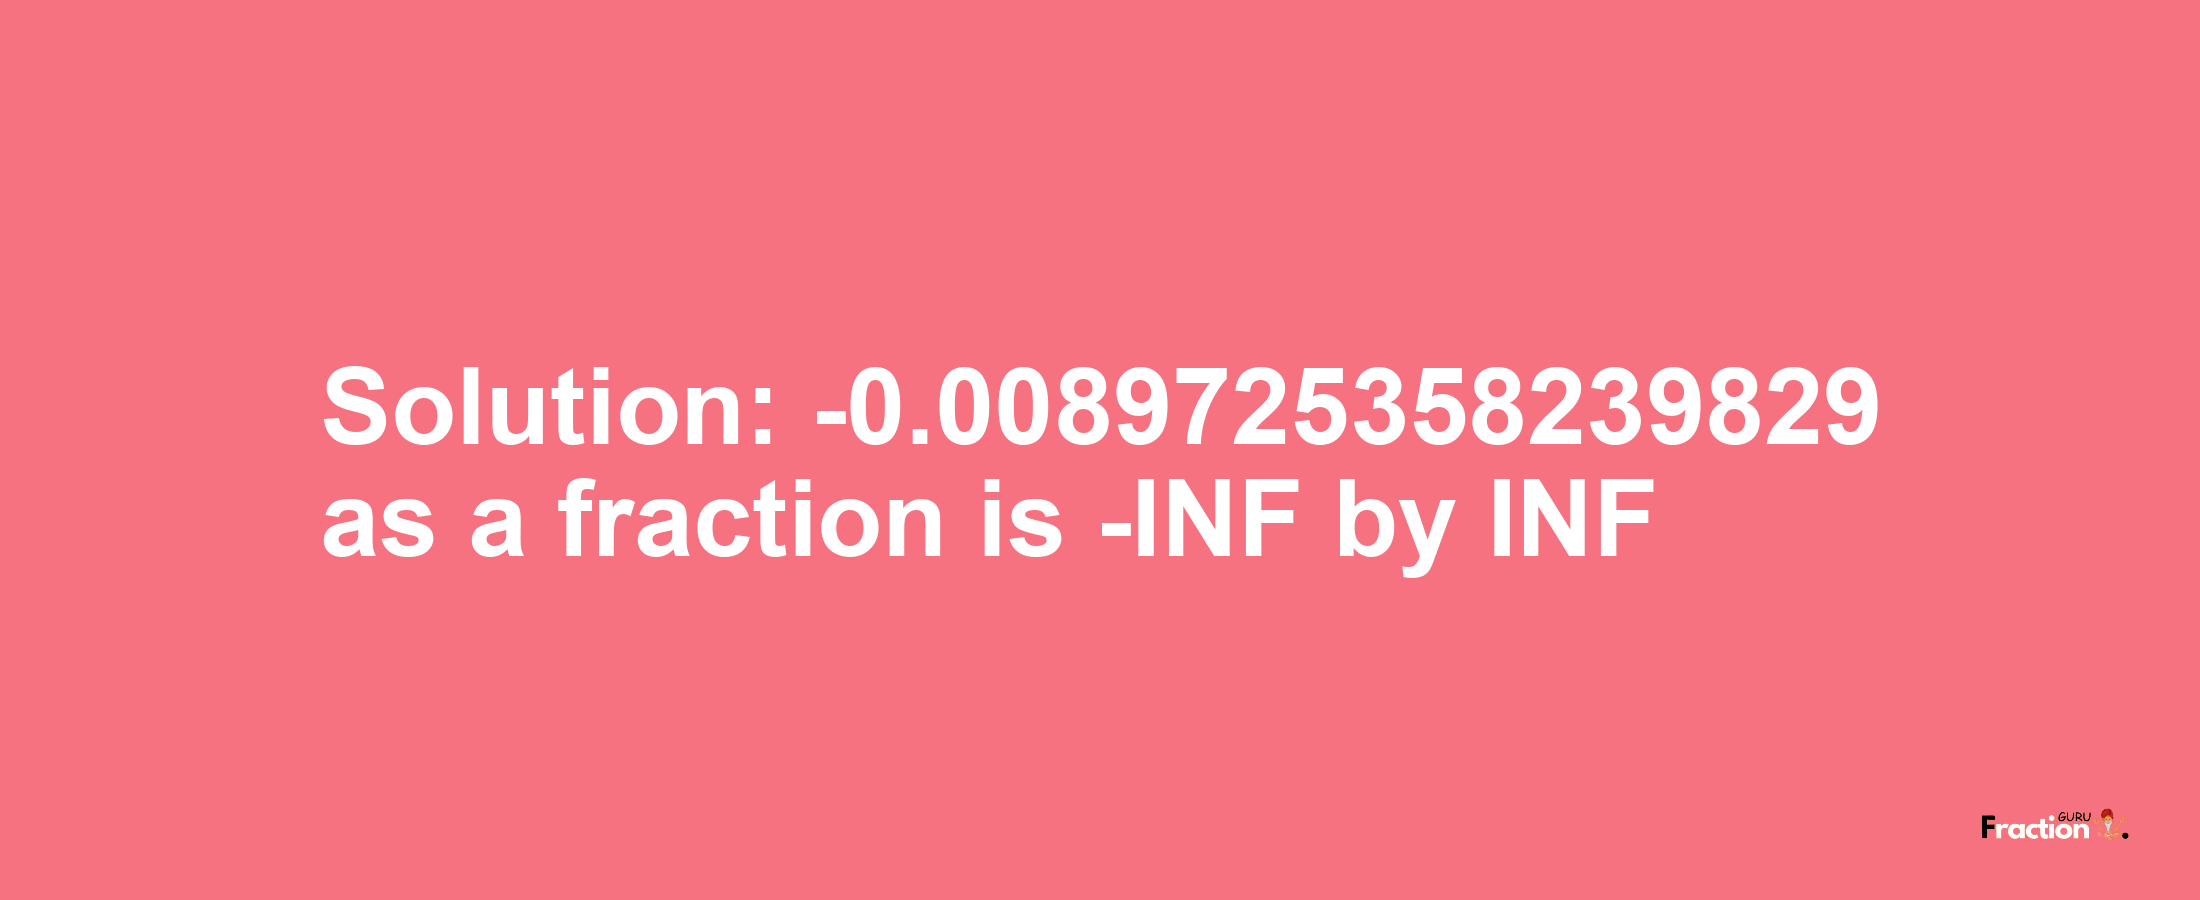 Solution:-0.0089725358239829 as a fraction is -INF/INF